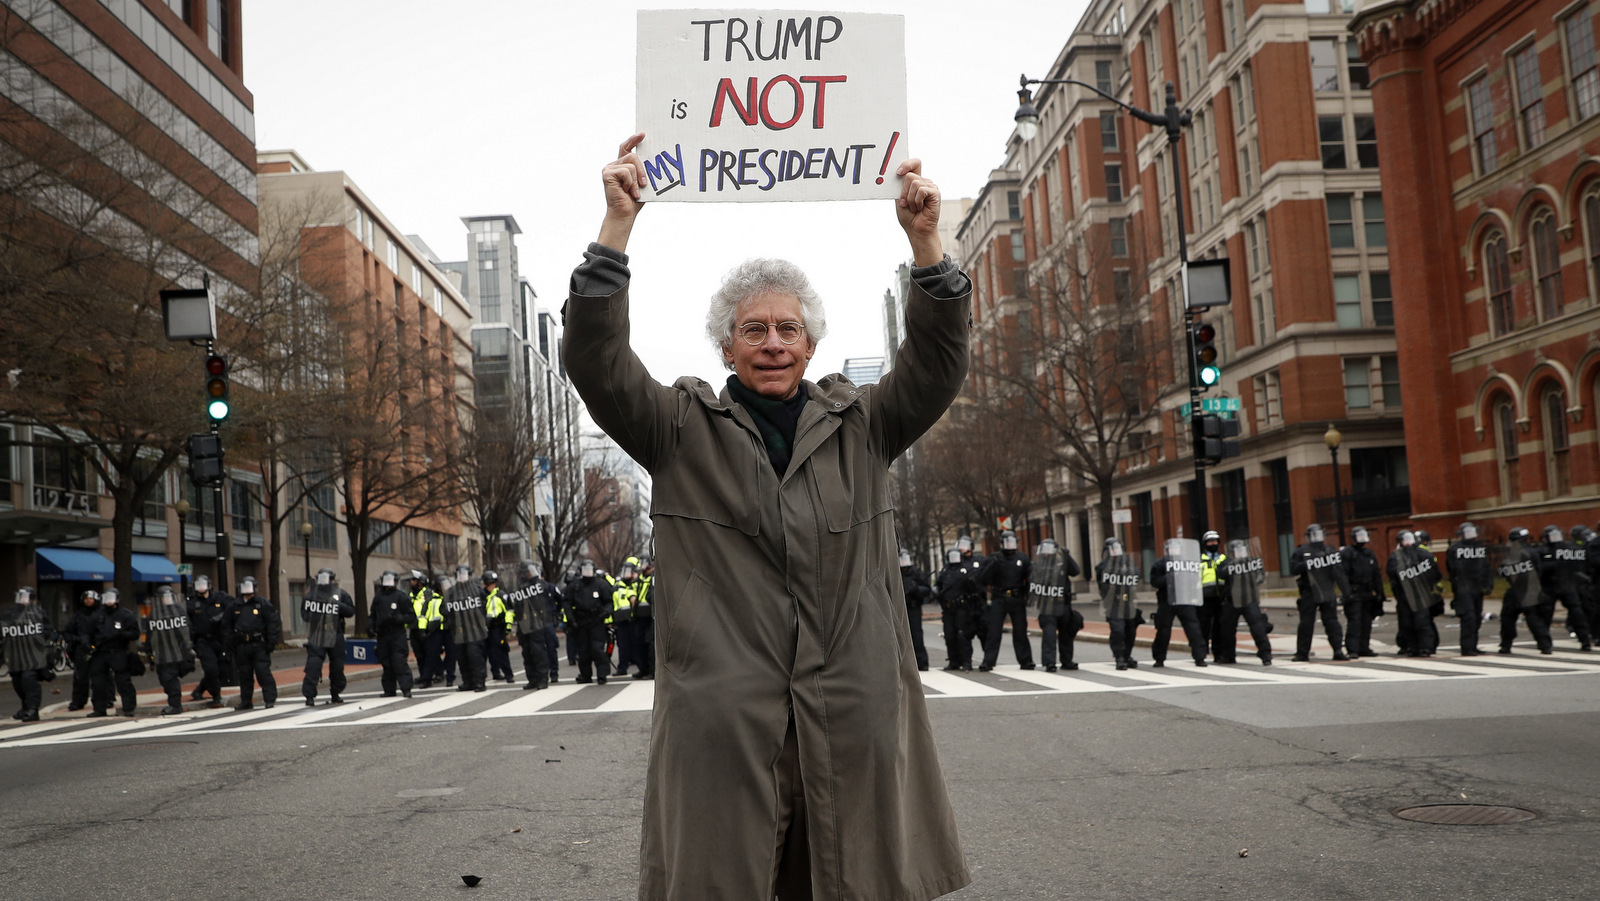 A protester stands in front of a riot police line during a demonstration after the inauguration of President Donald Trump, Friday, Jan. 20, 2017, in Washington. (AP/John Minchillo)